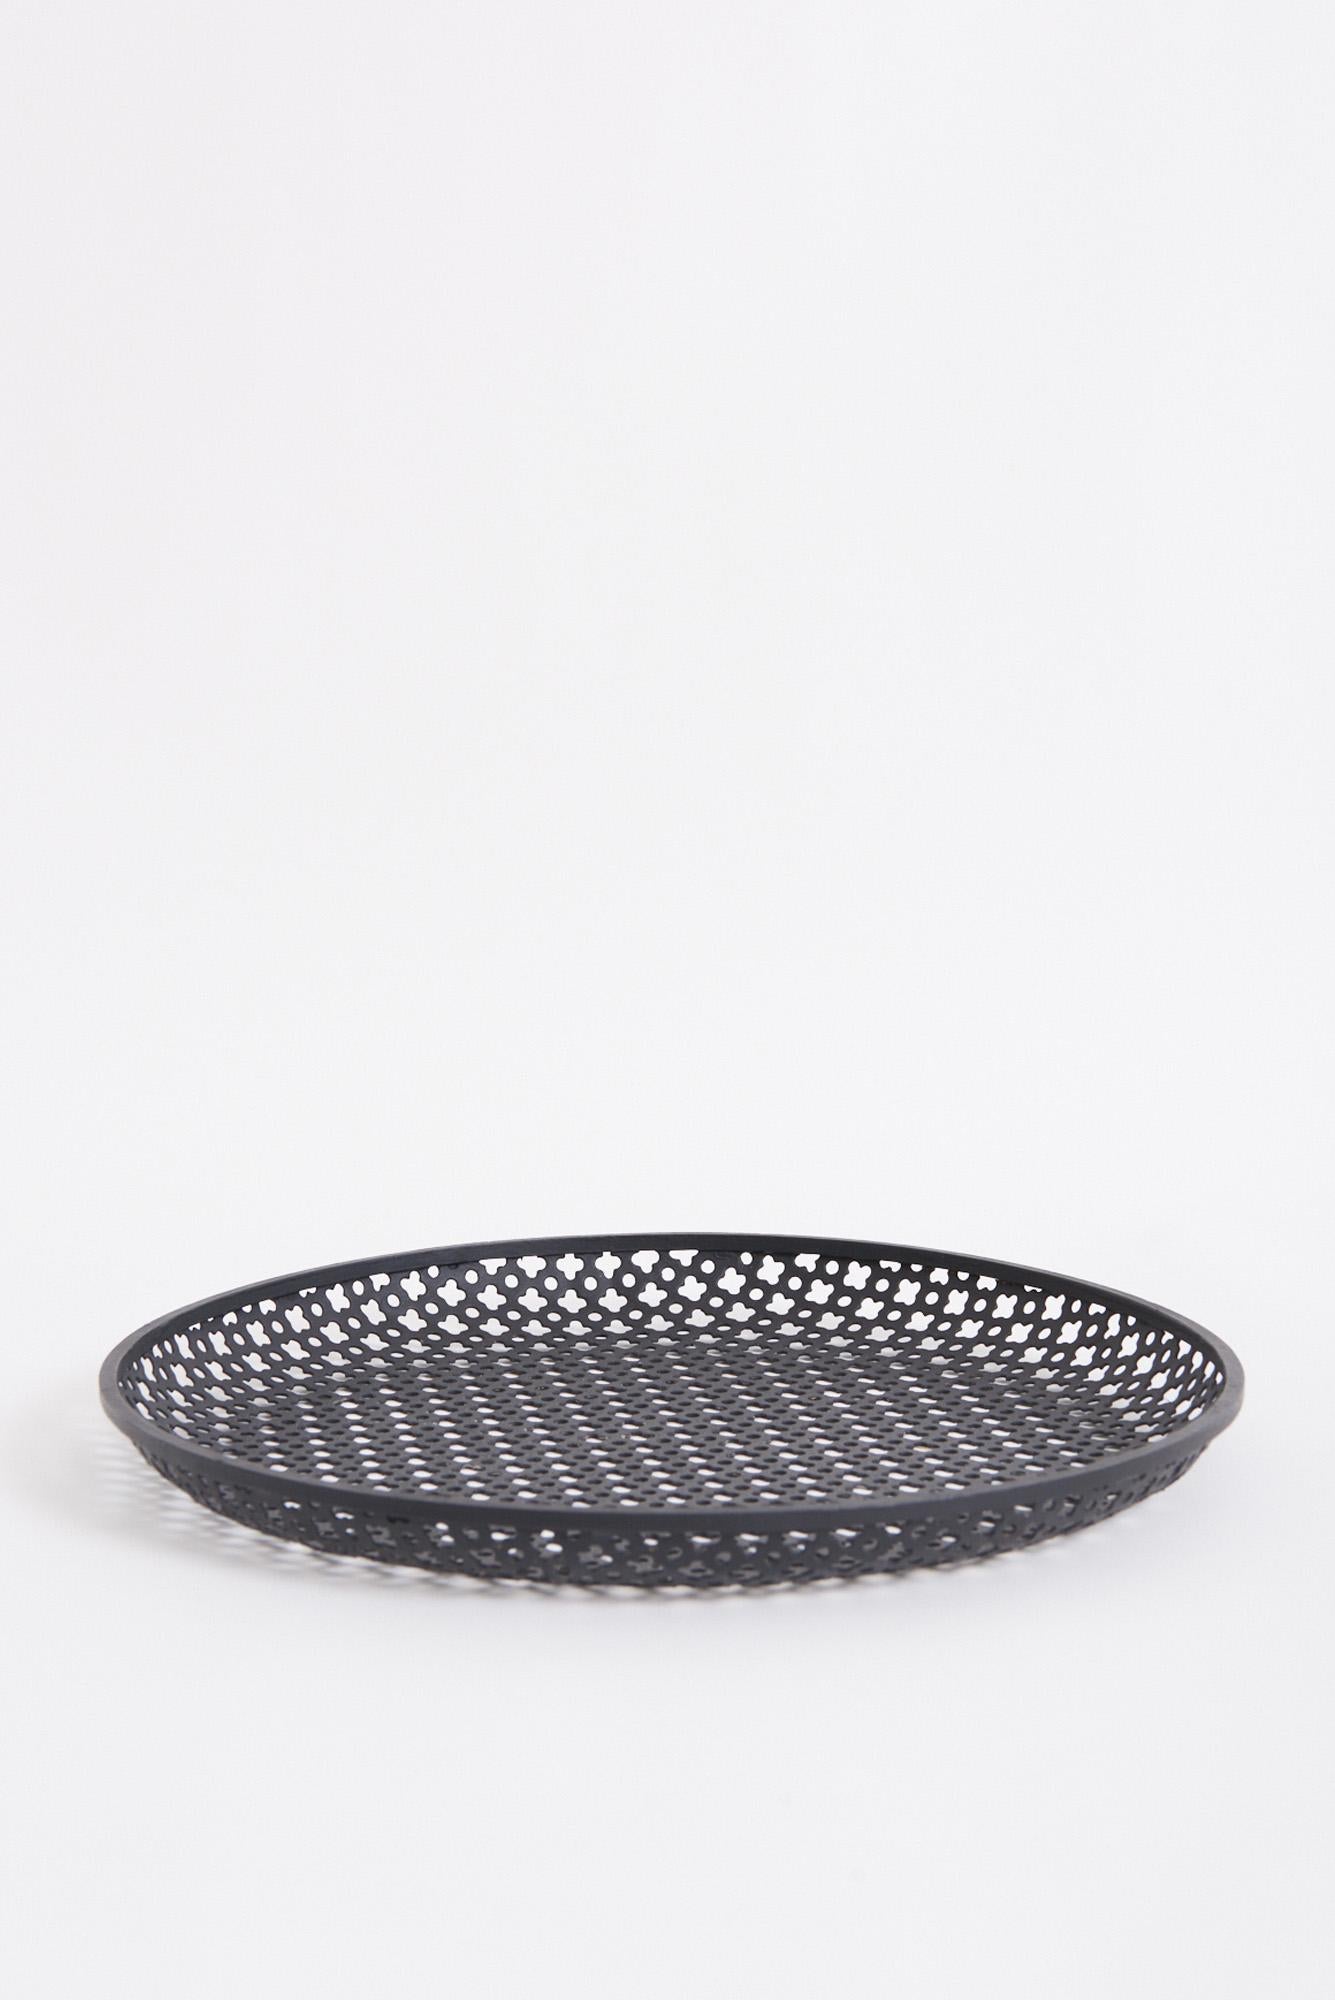 French Circular Tray by Mathieu Mategot For Sale